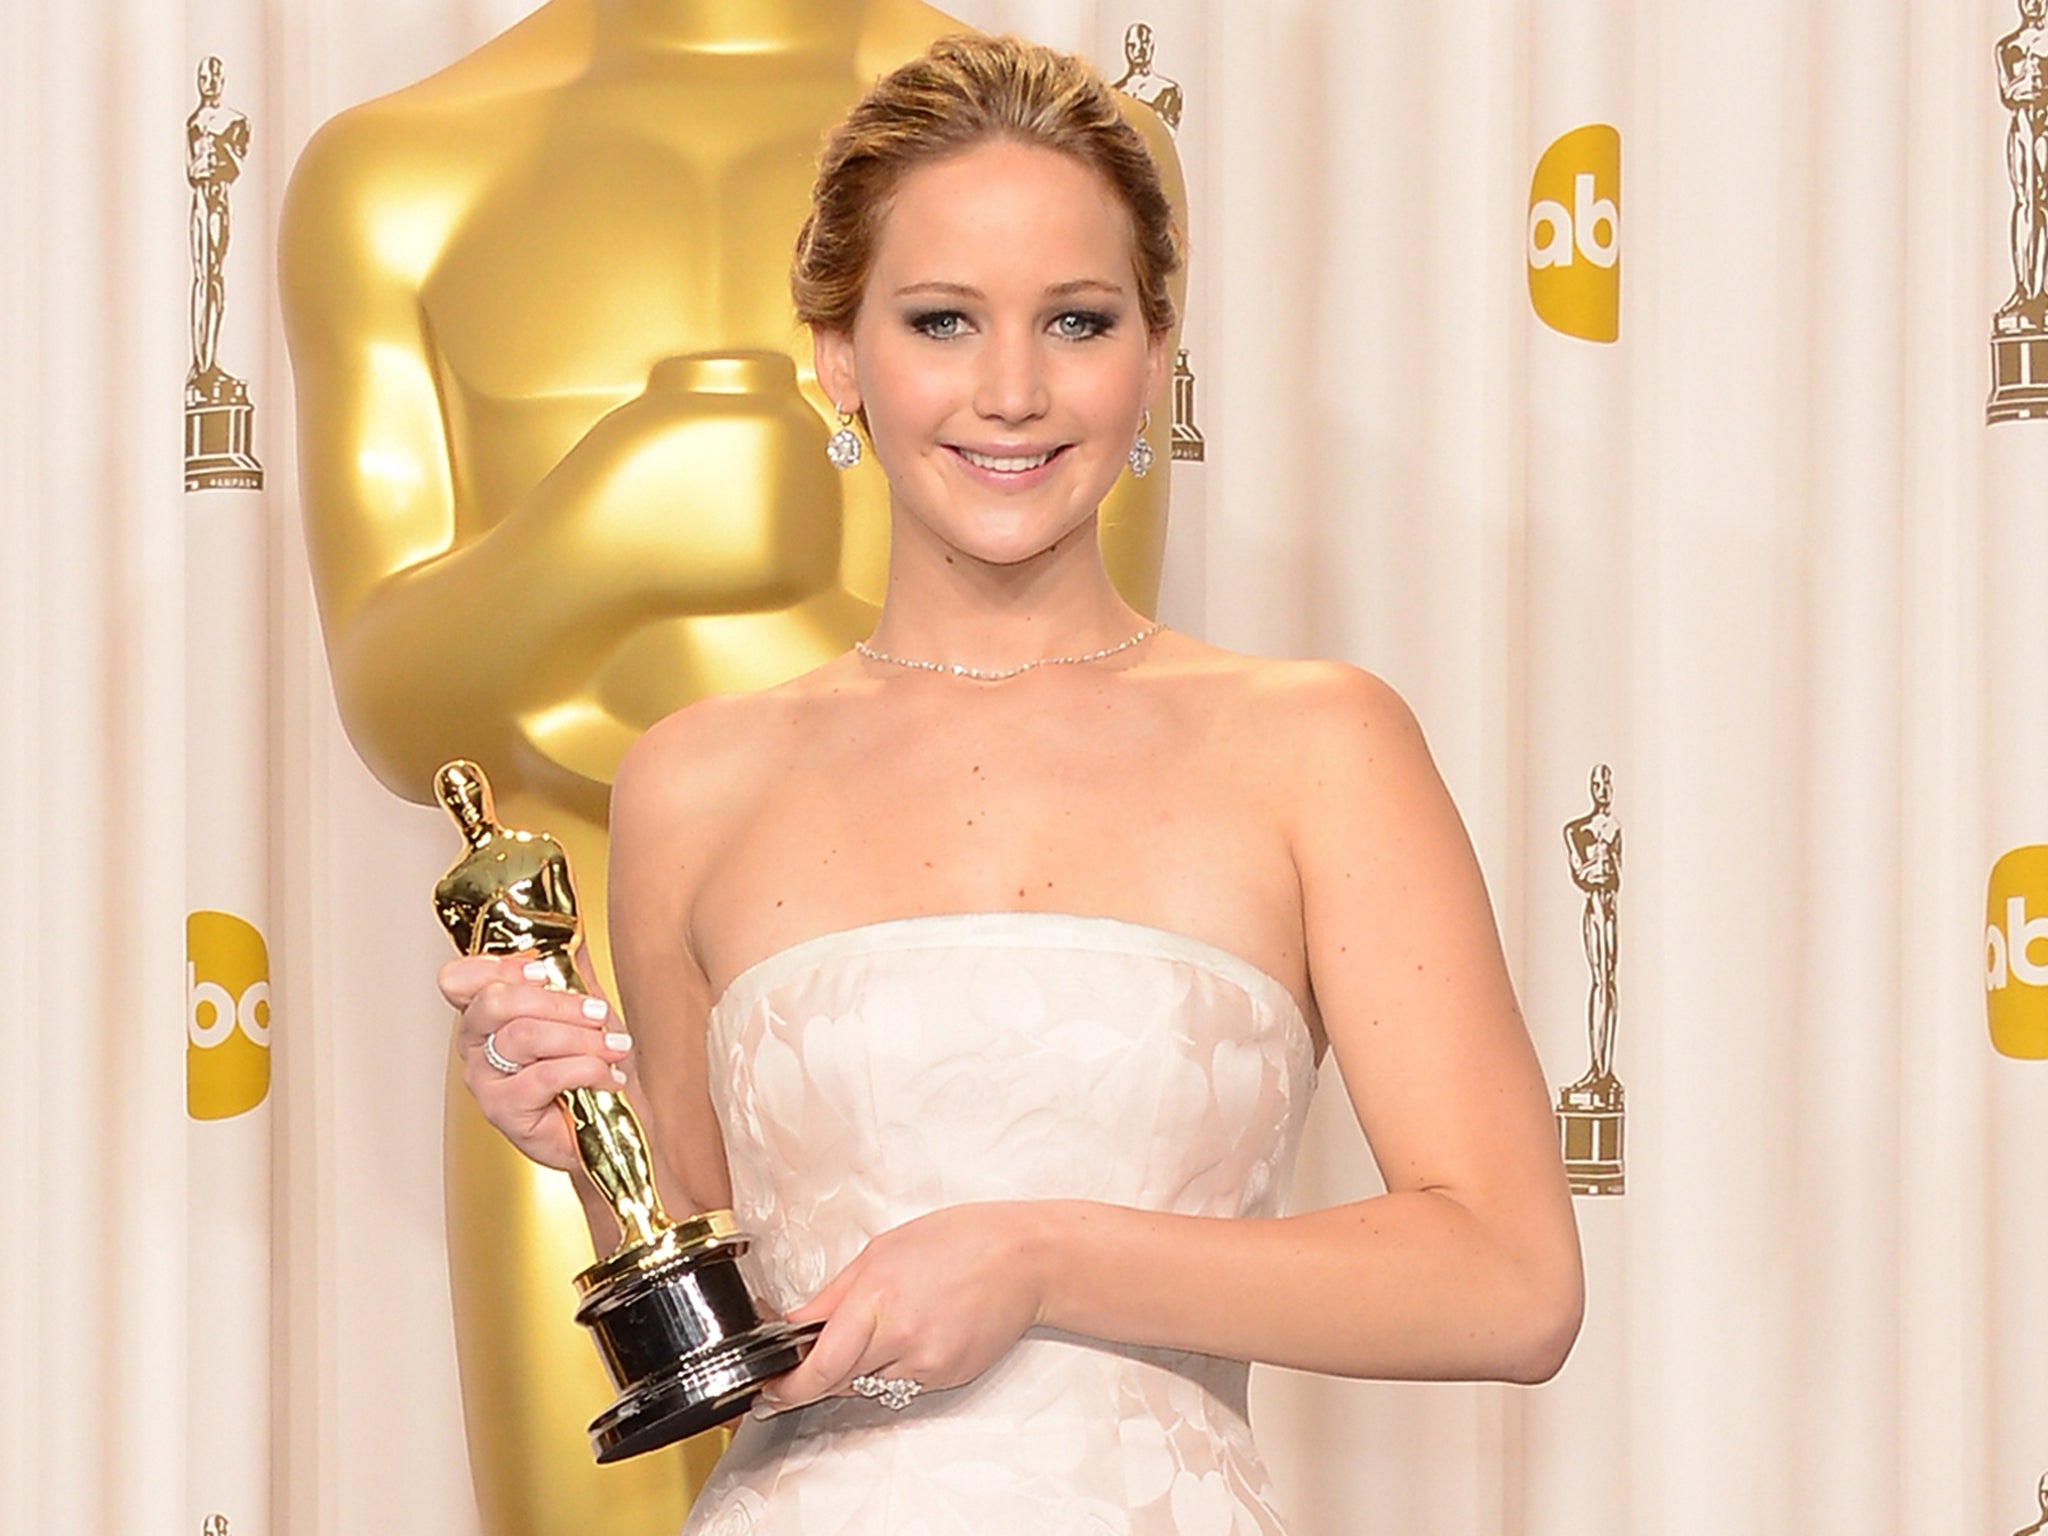 Jennifer Lawrence poses with her award after winning Best Actress for Silver Linings Playbook at the 2013 Oscars